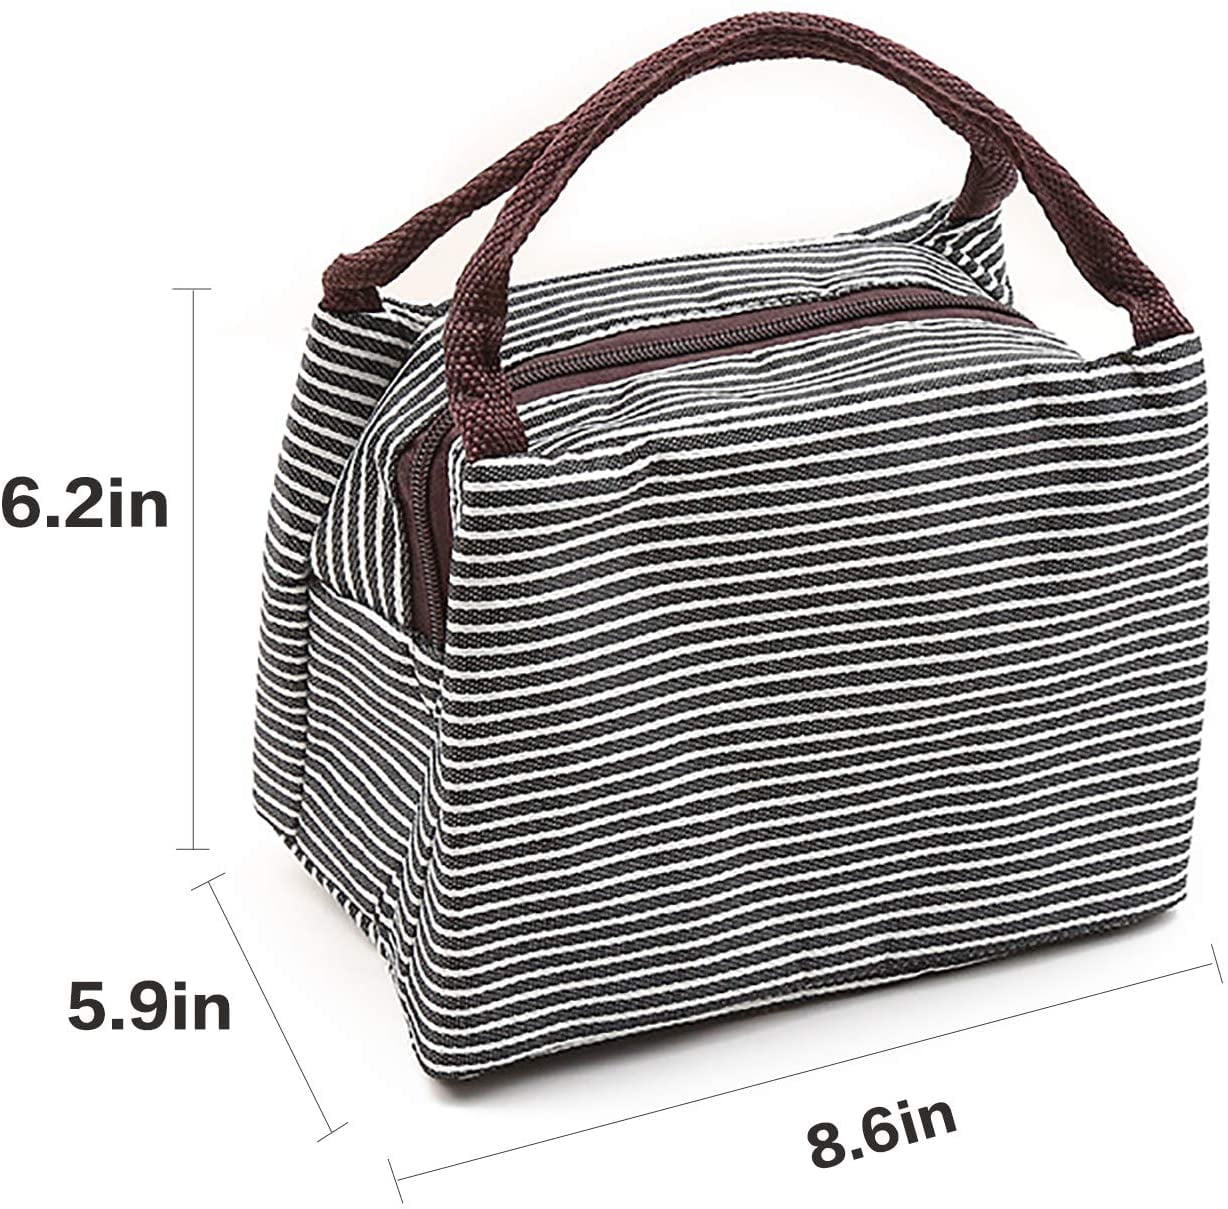 Details about   Insulated Lunch Bag Thermal Cooler Women Kids Picnic Food Box Tote Carry Bags 